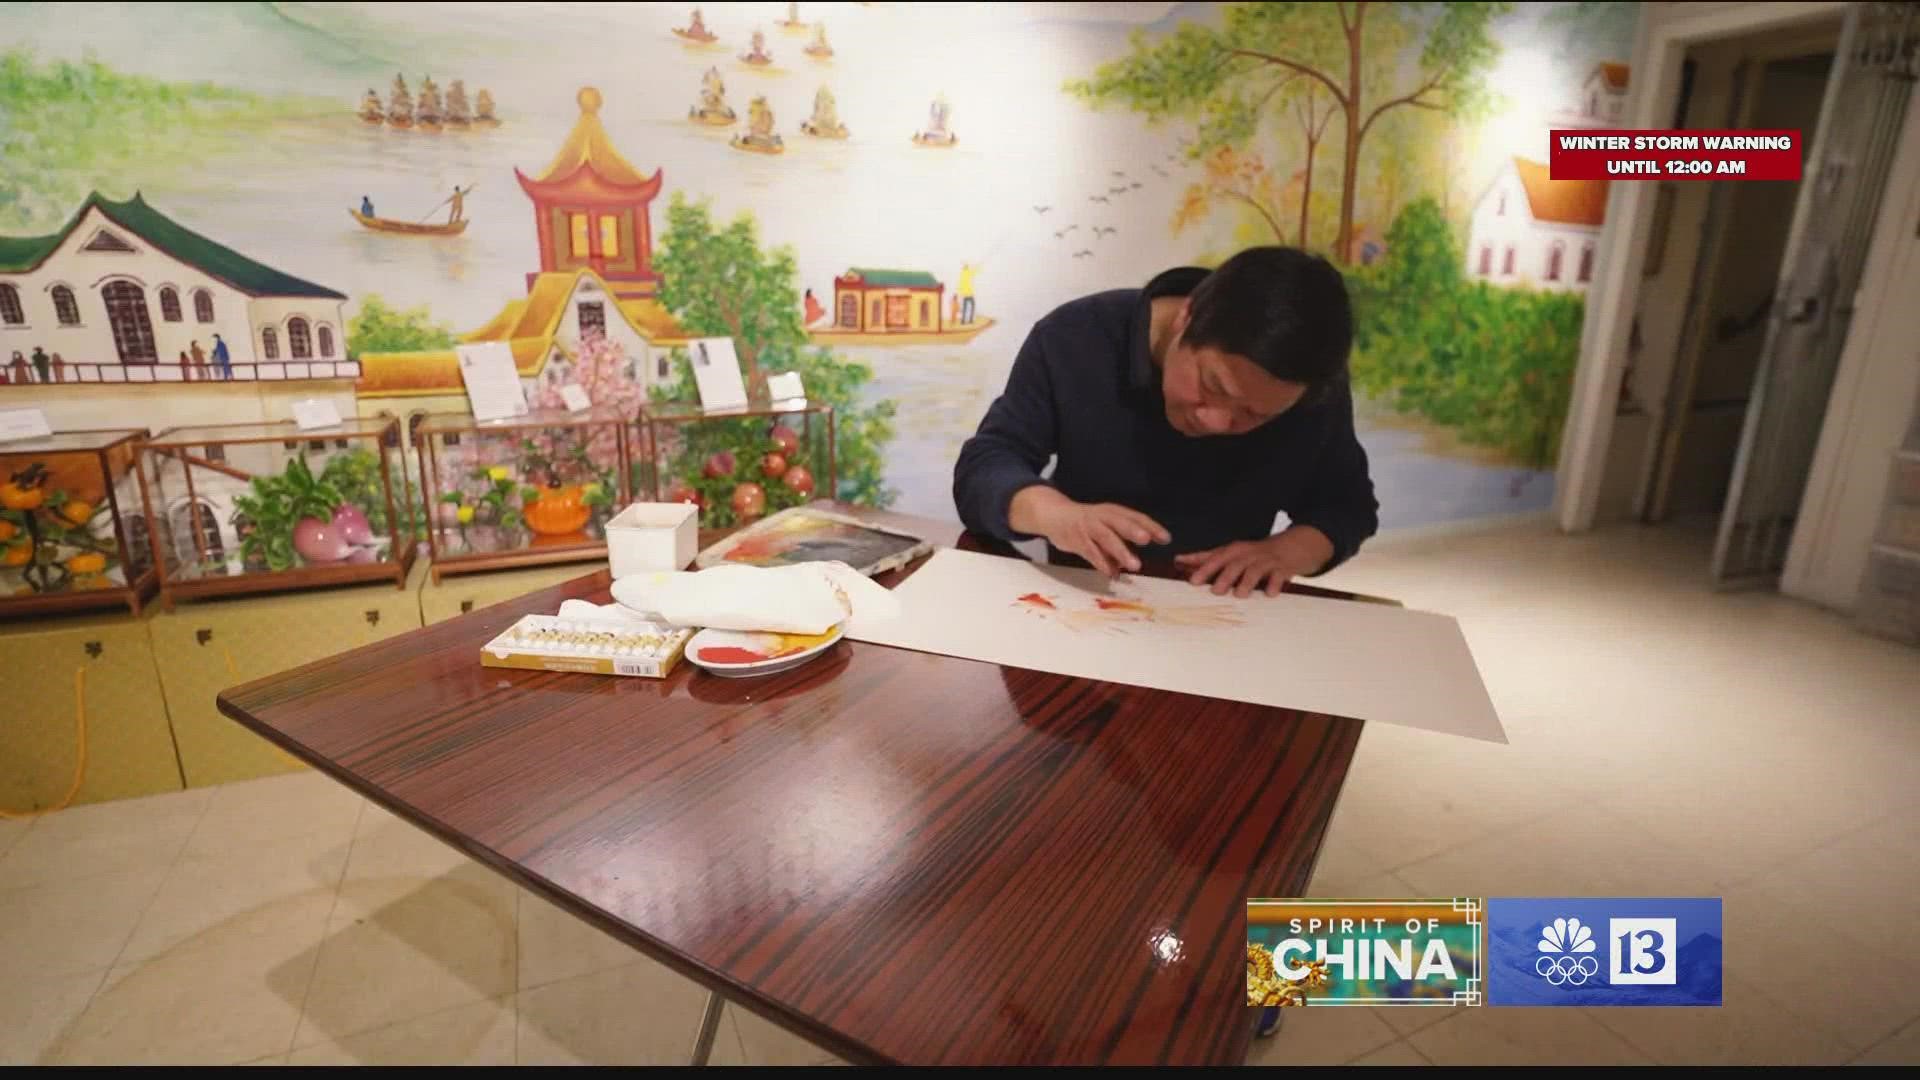 For most of his life, Ben Huang's hands made food in a restaurant. Now he's creating artwork, one finger at a time.